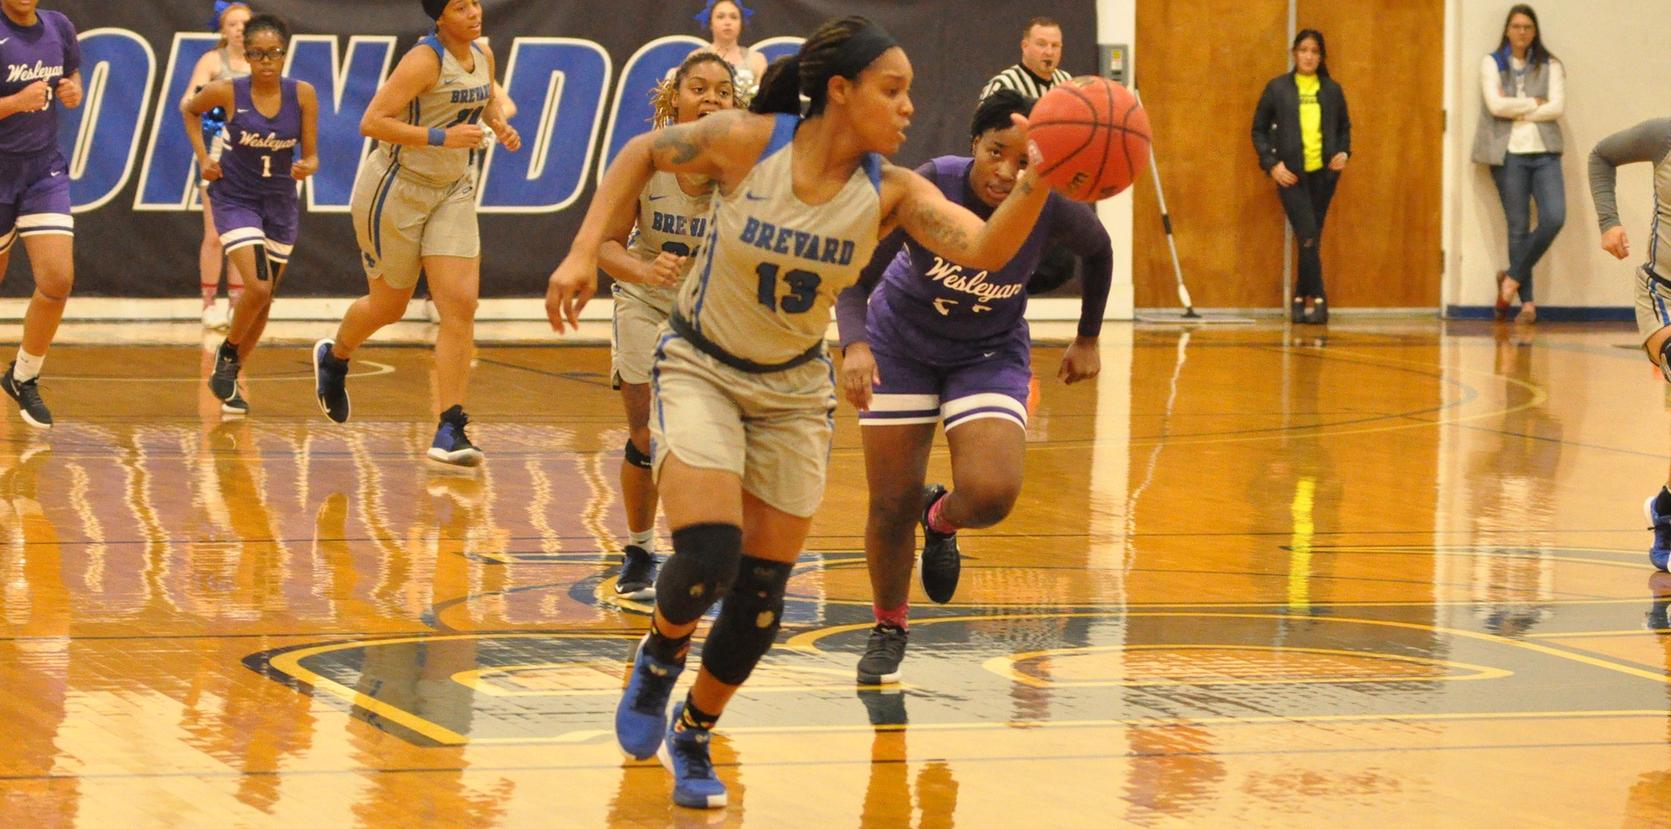 Destiny Williams totaled 10 points, five rebounds, and two blocks vs. NCAA DI Wofford (Photo courtesy of Tommy Moss).